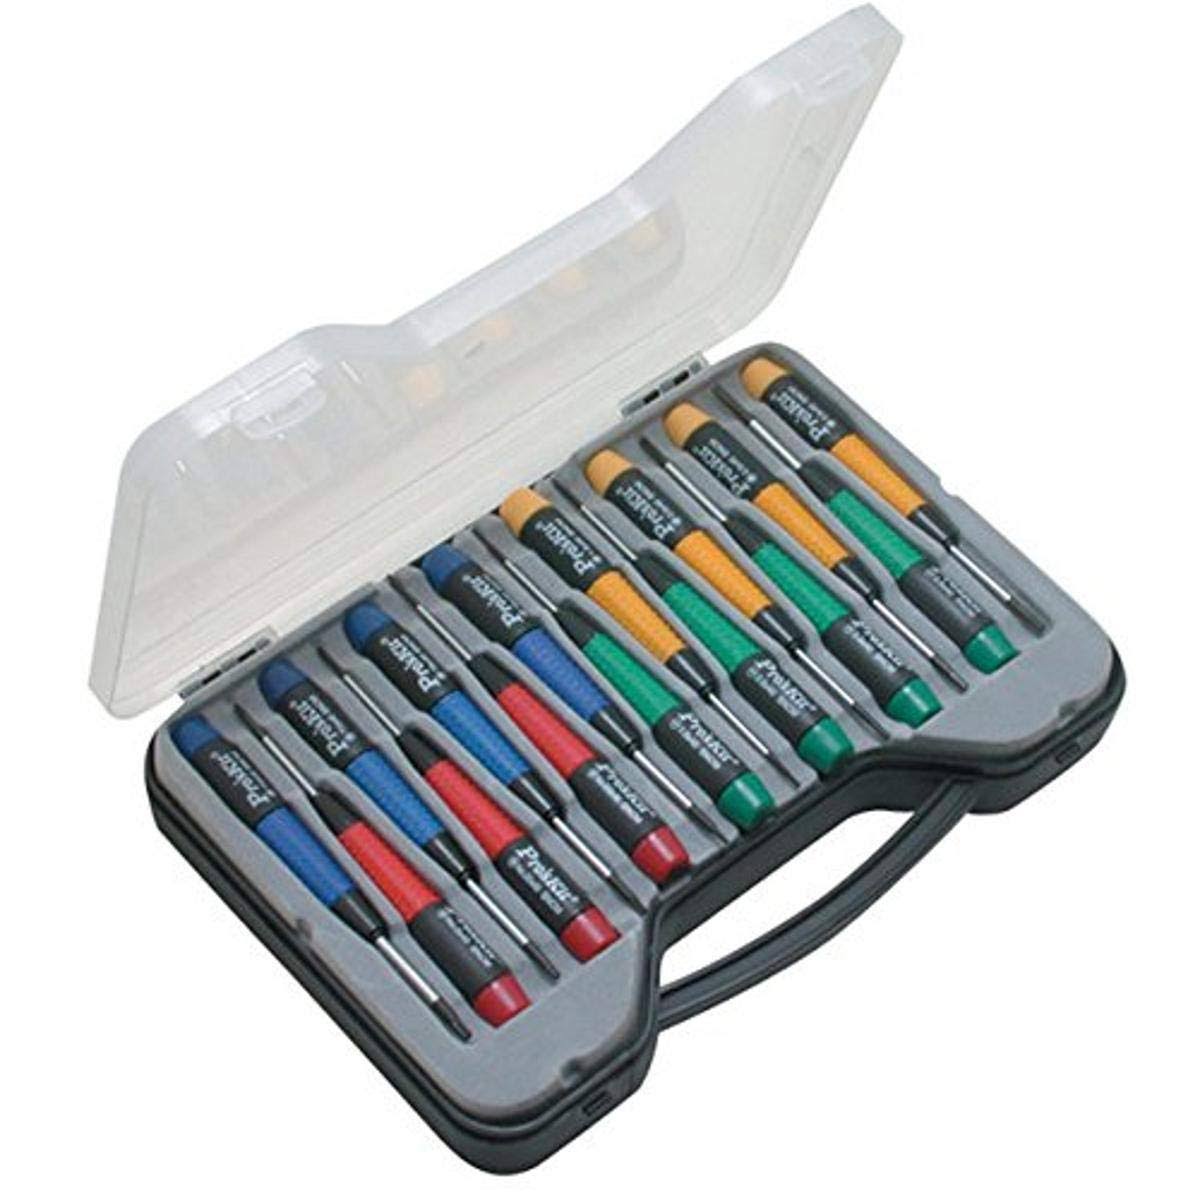 Eclipse Tools 31 in 1 Precision Electronic Screwdriver Set